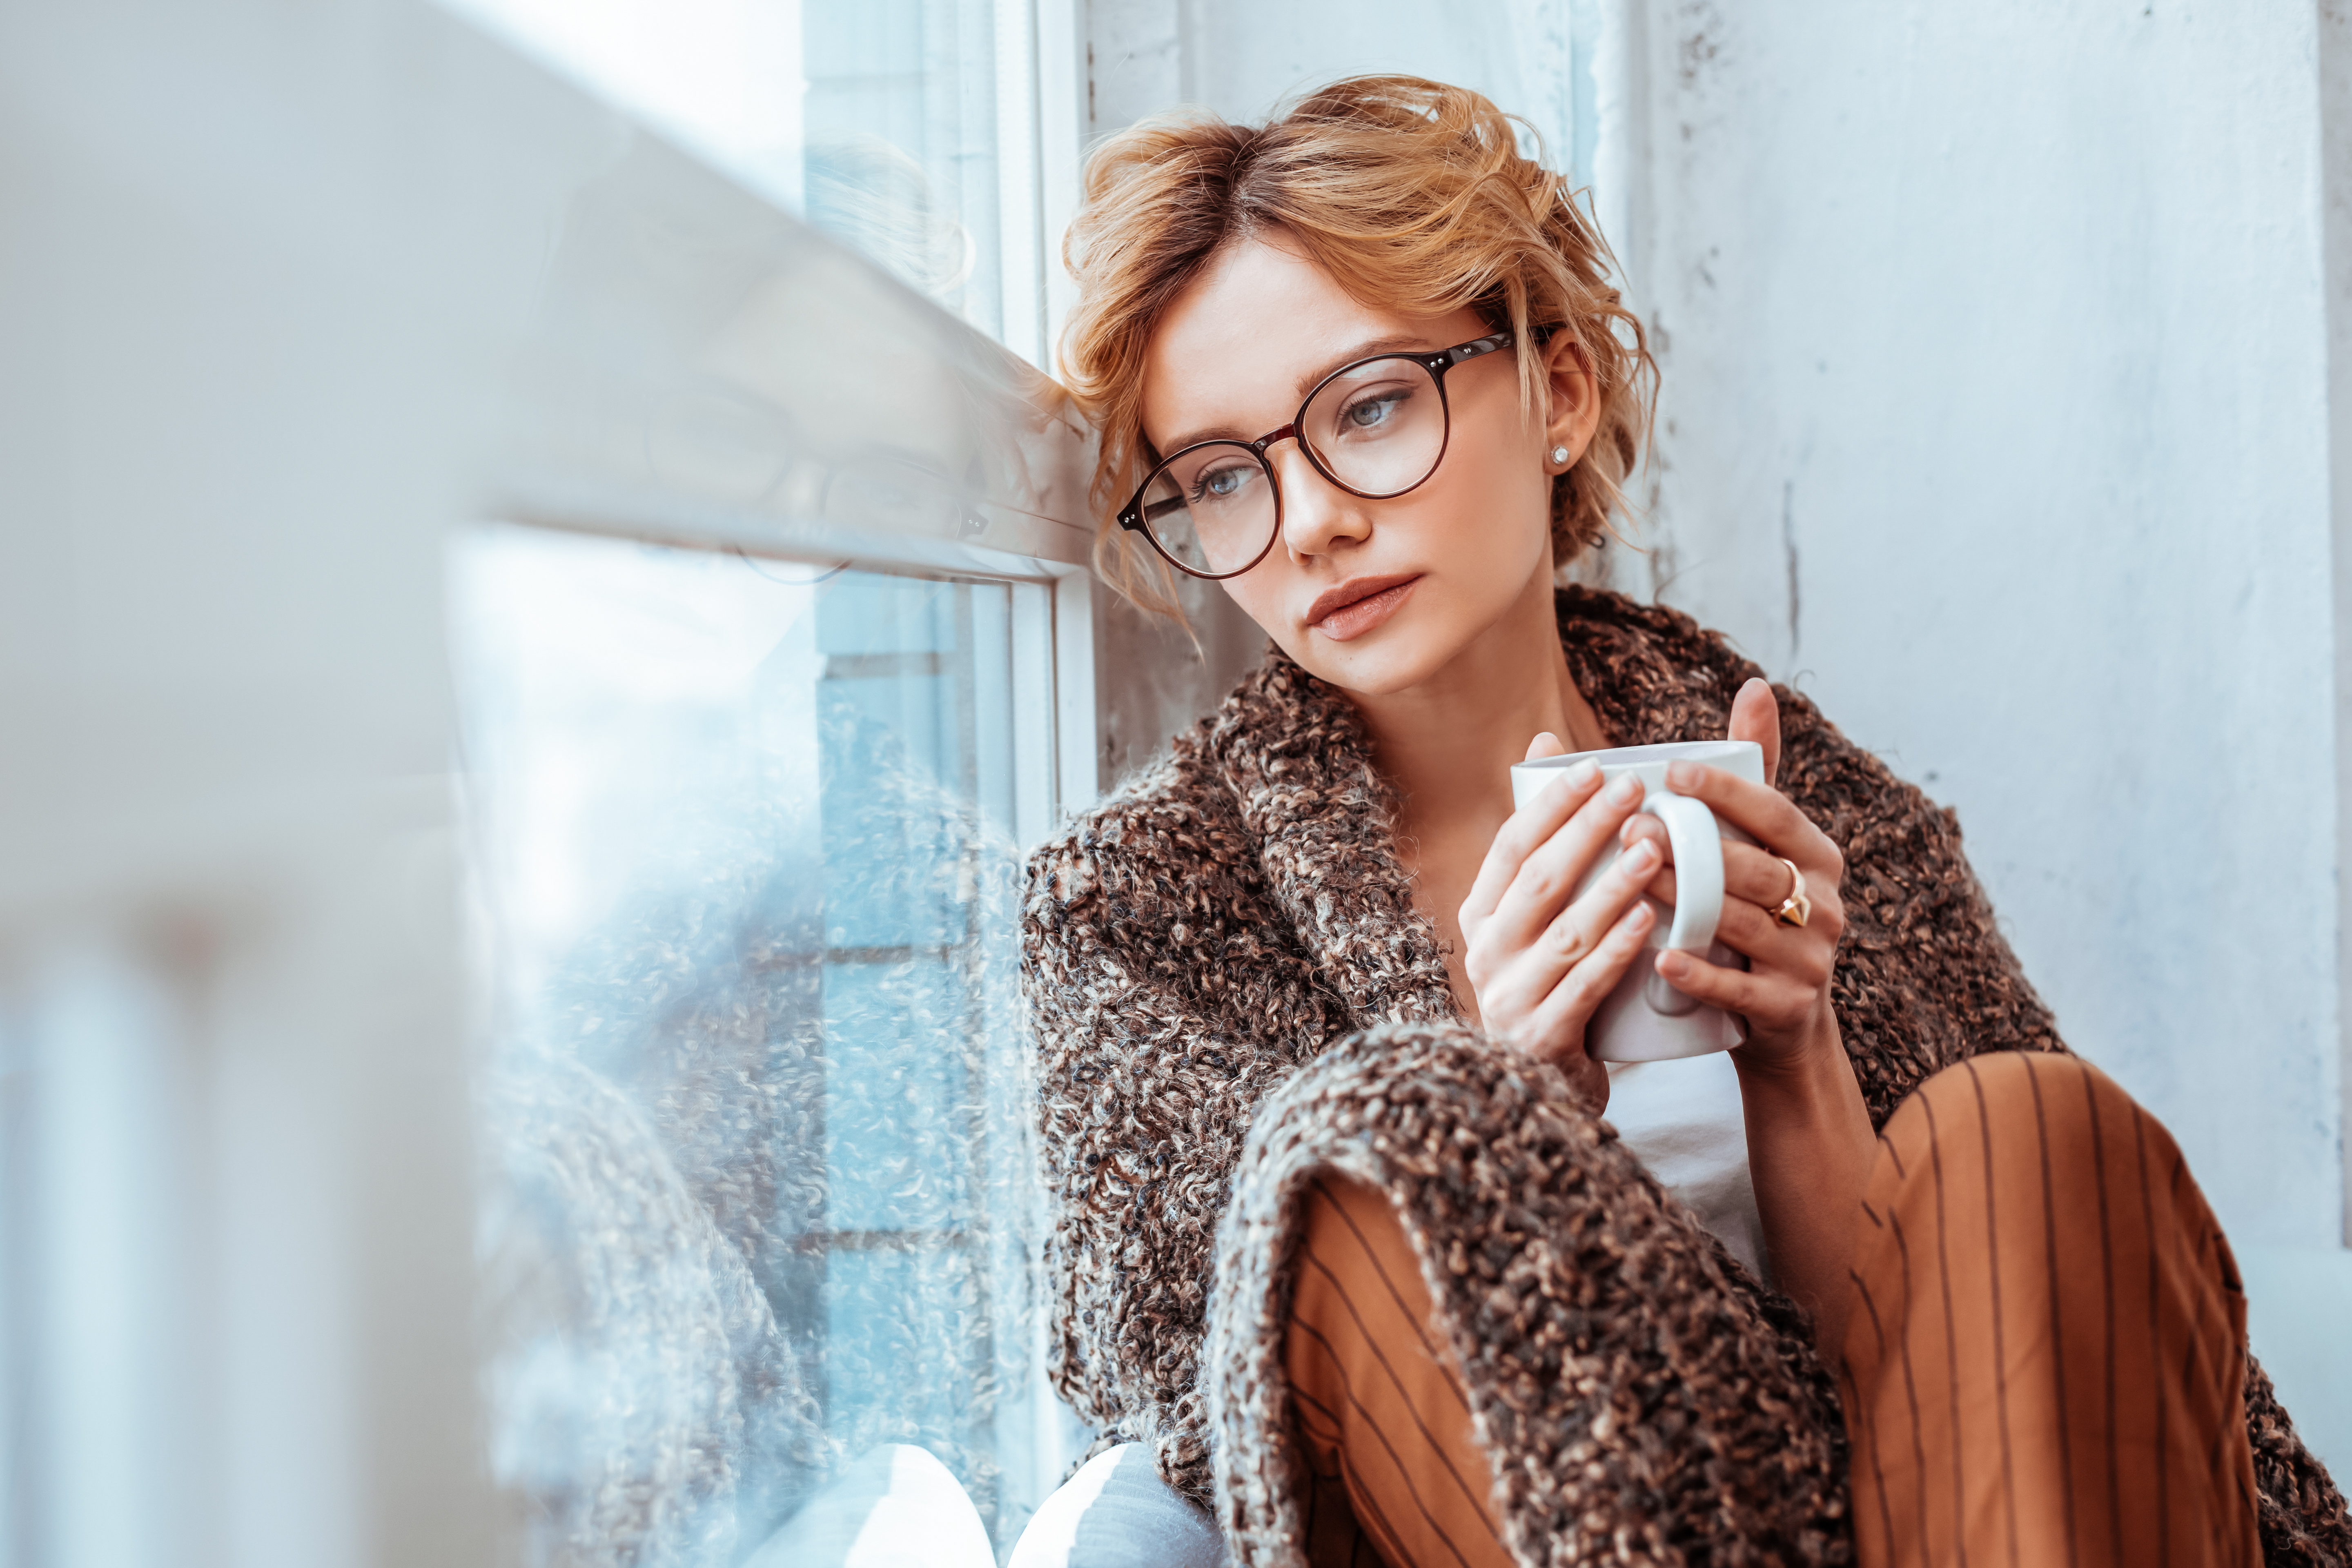 Sad woman alone with cup of coffee